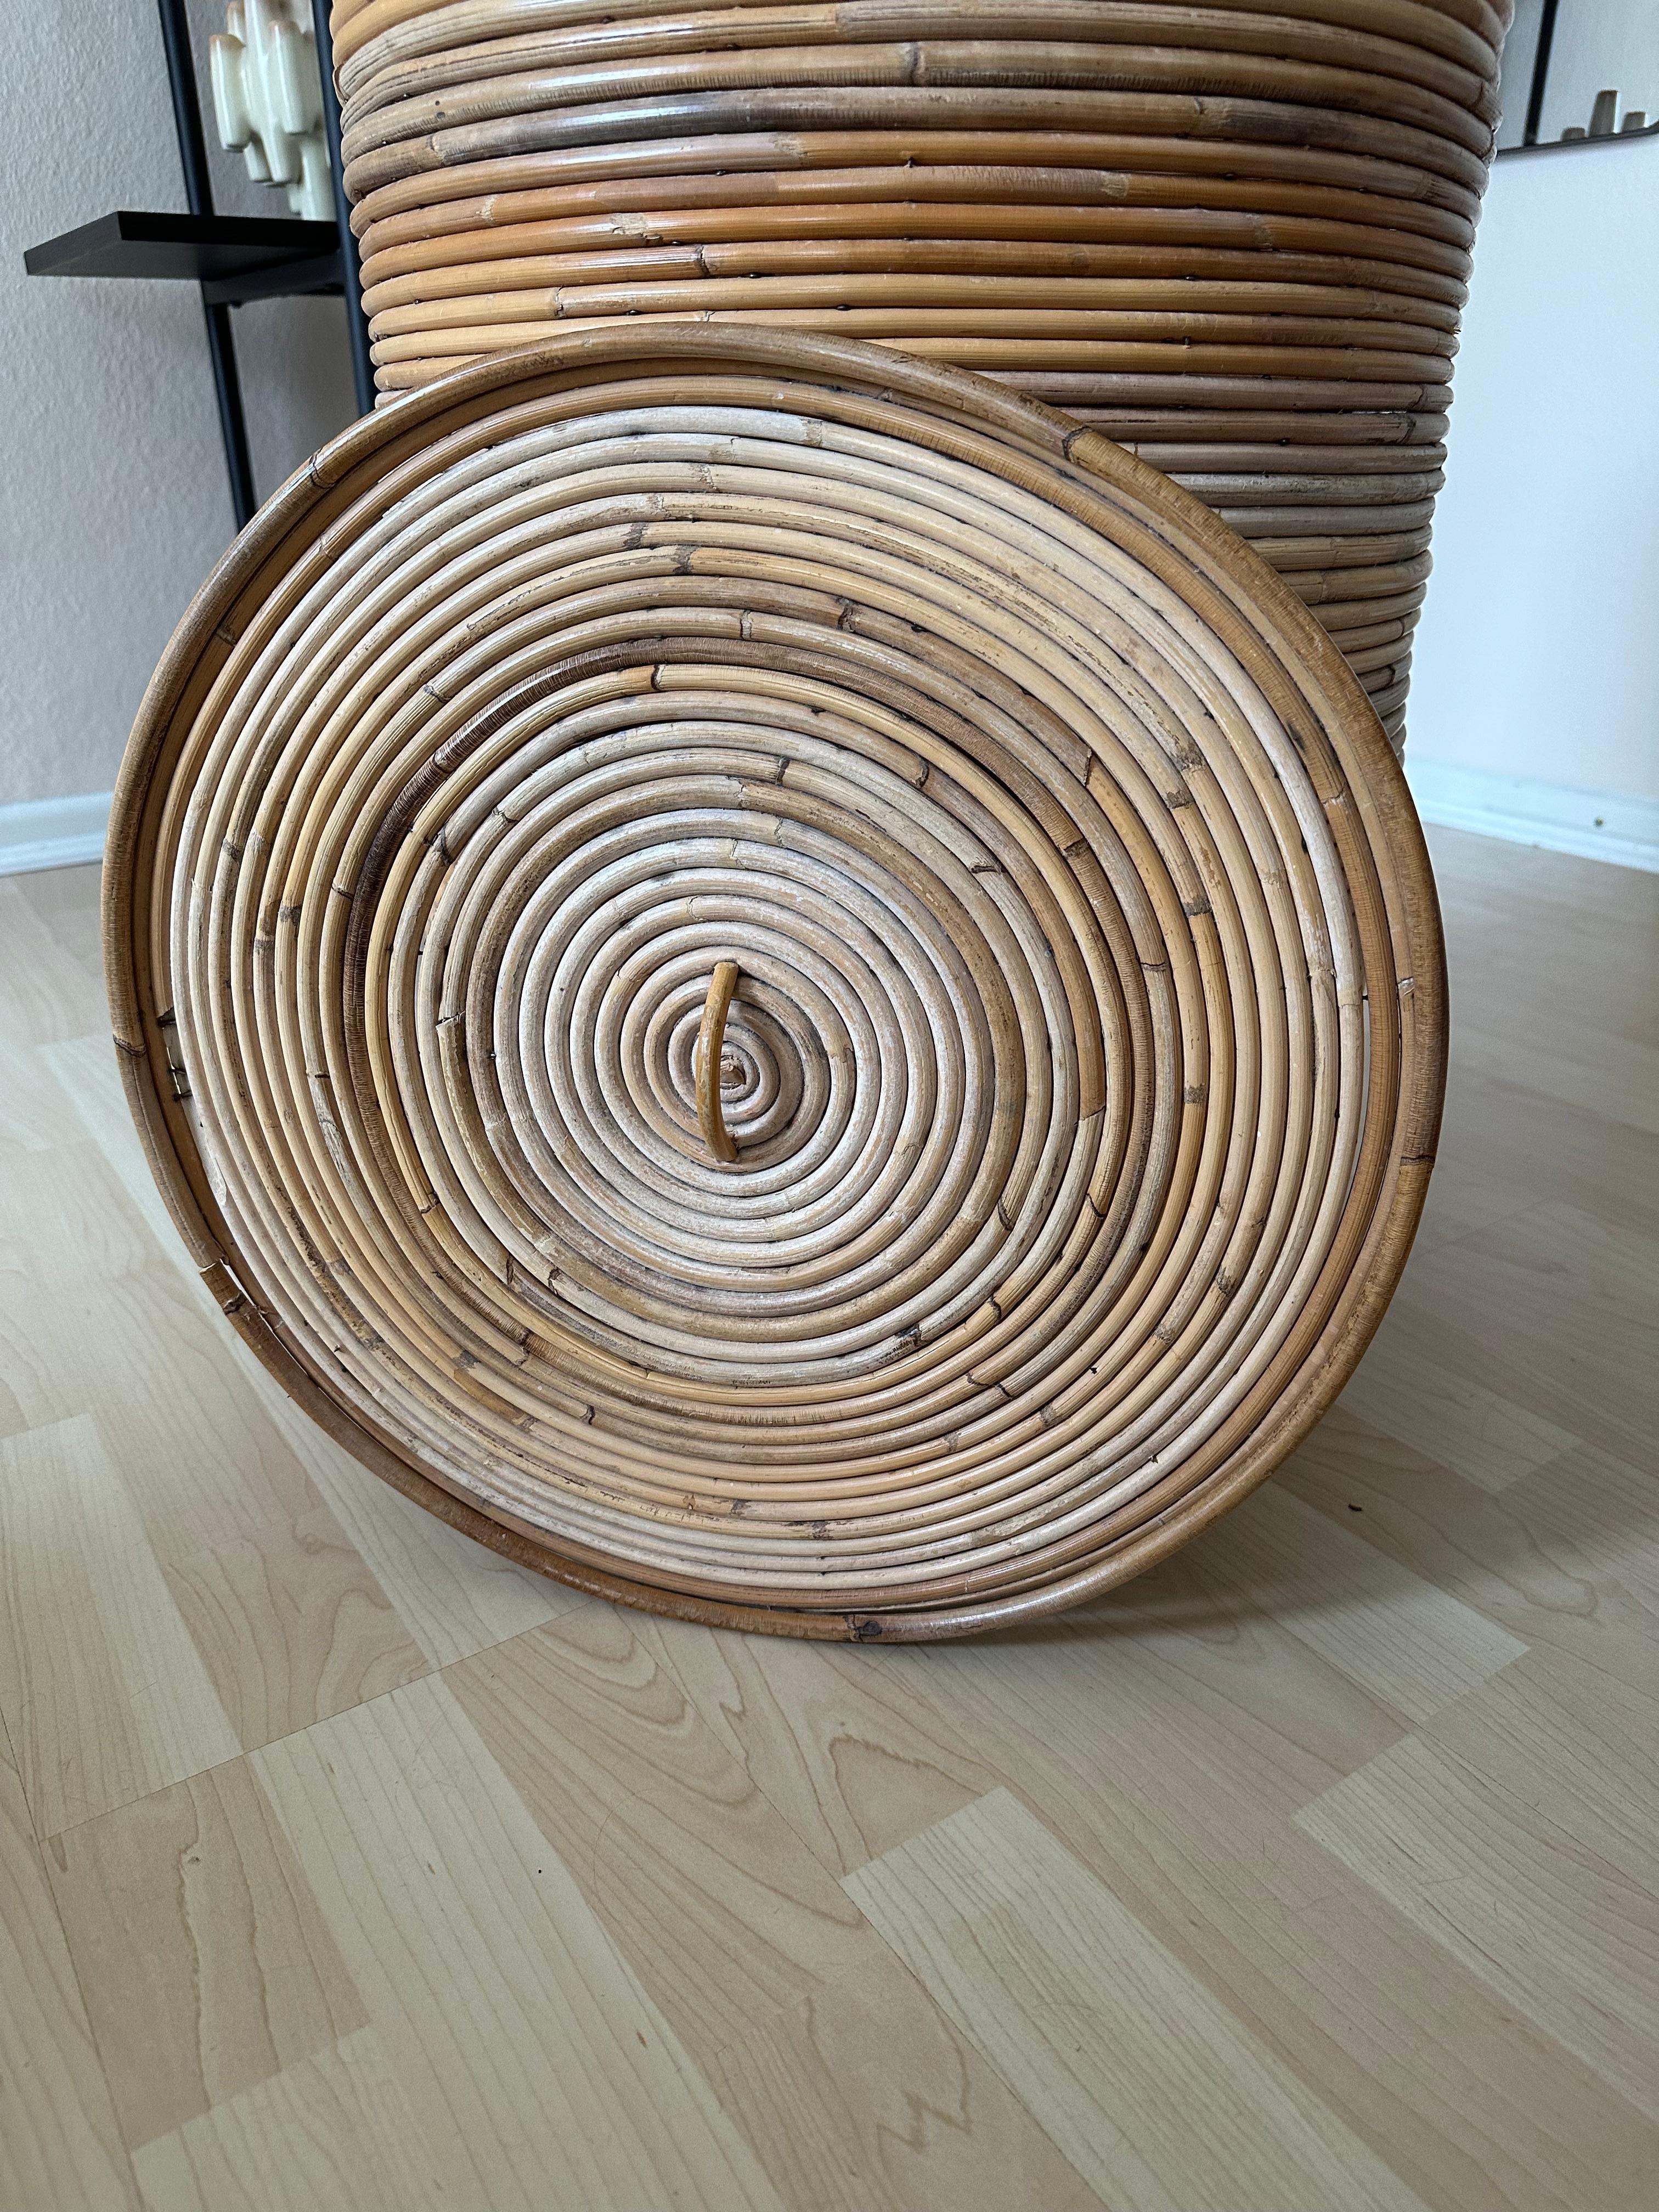 Big Rattan basket in Boho style For Sale 2